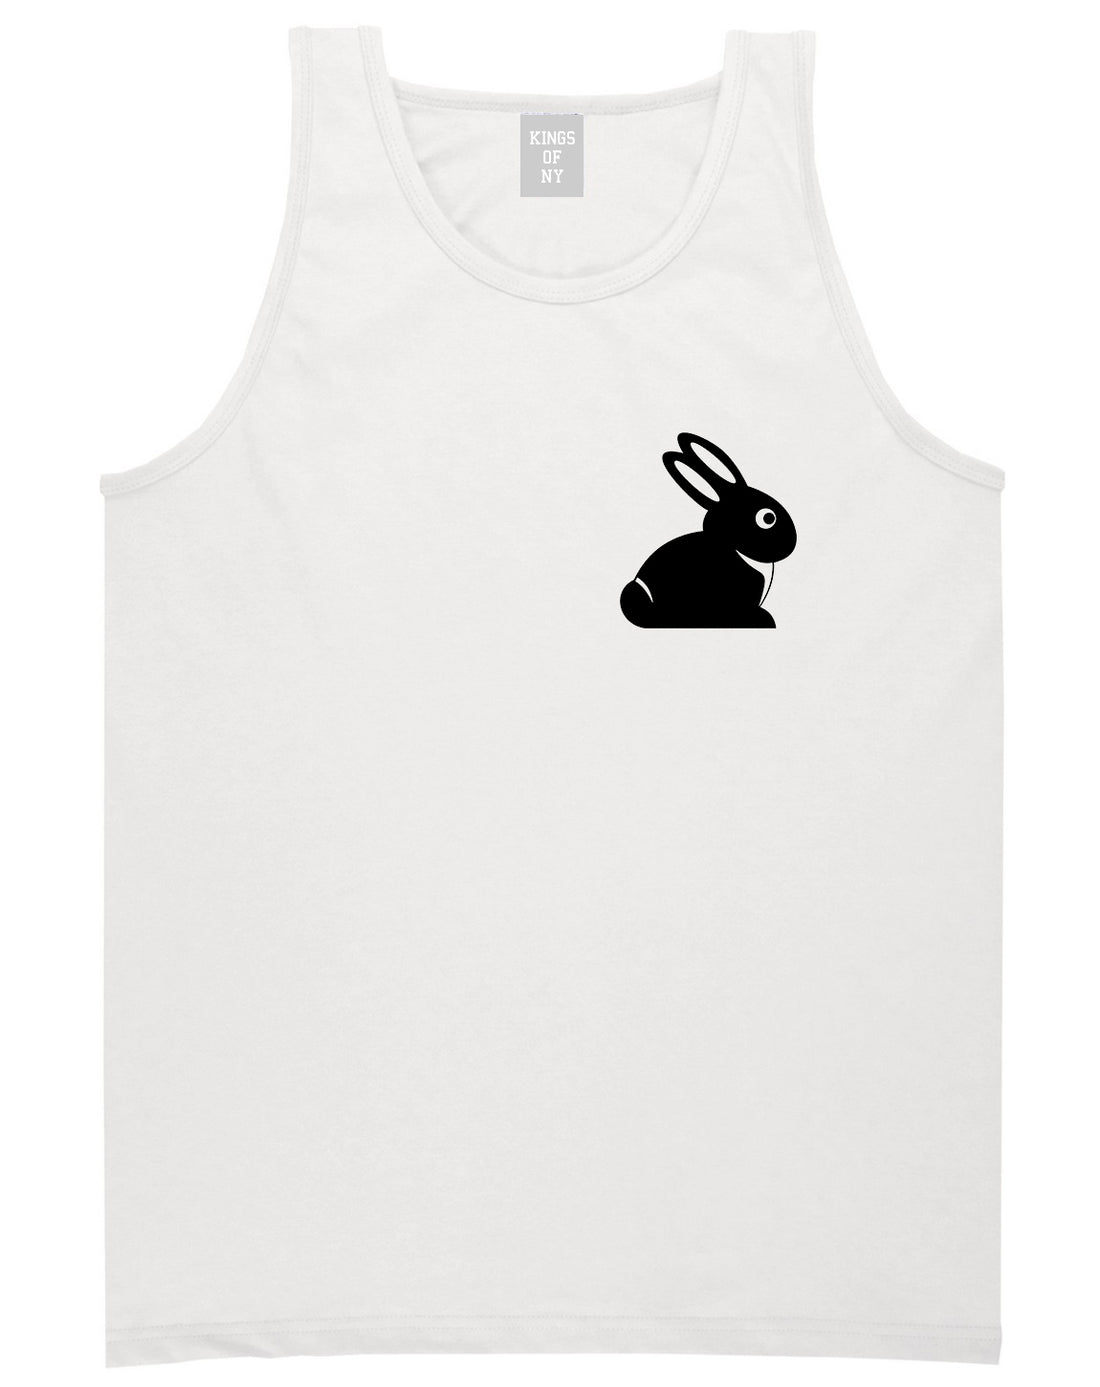 Easter_Bunny_Rabbit_Chest Mens White Tank Top Shirt by Kings Of NY